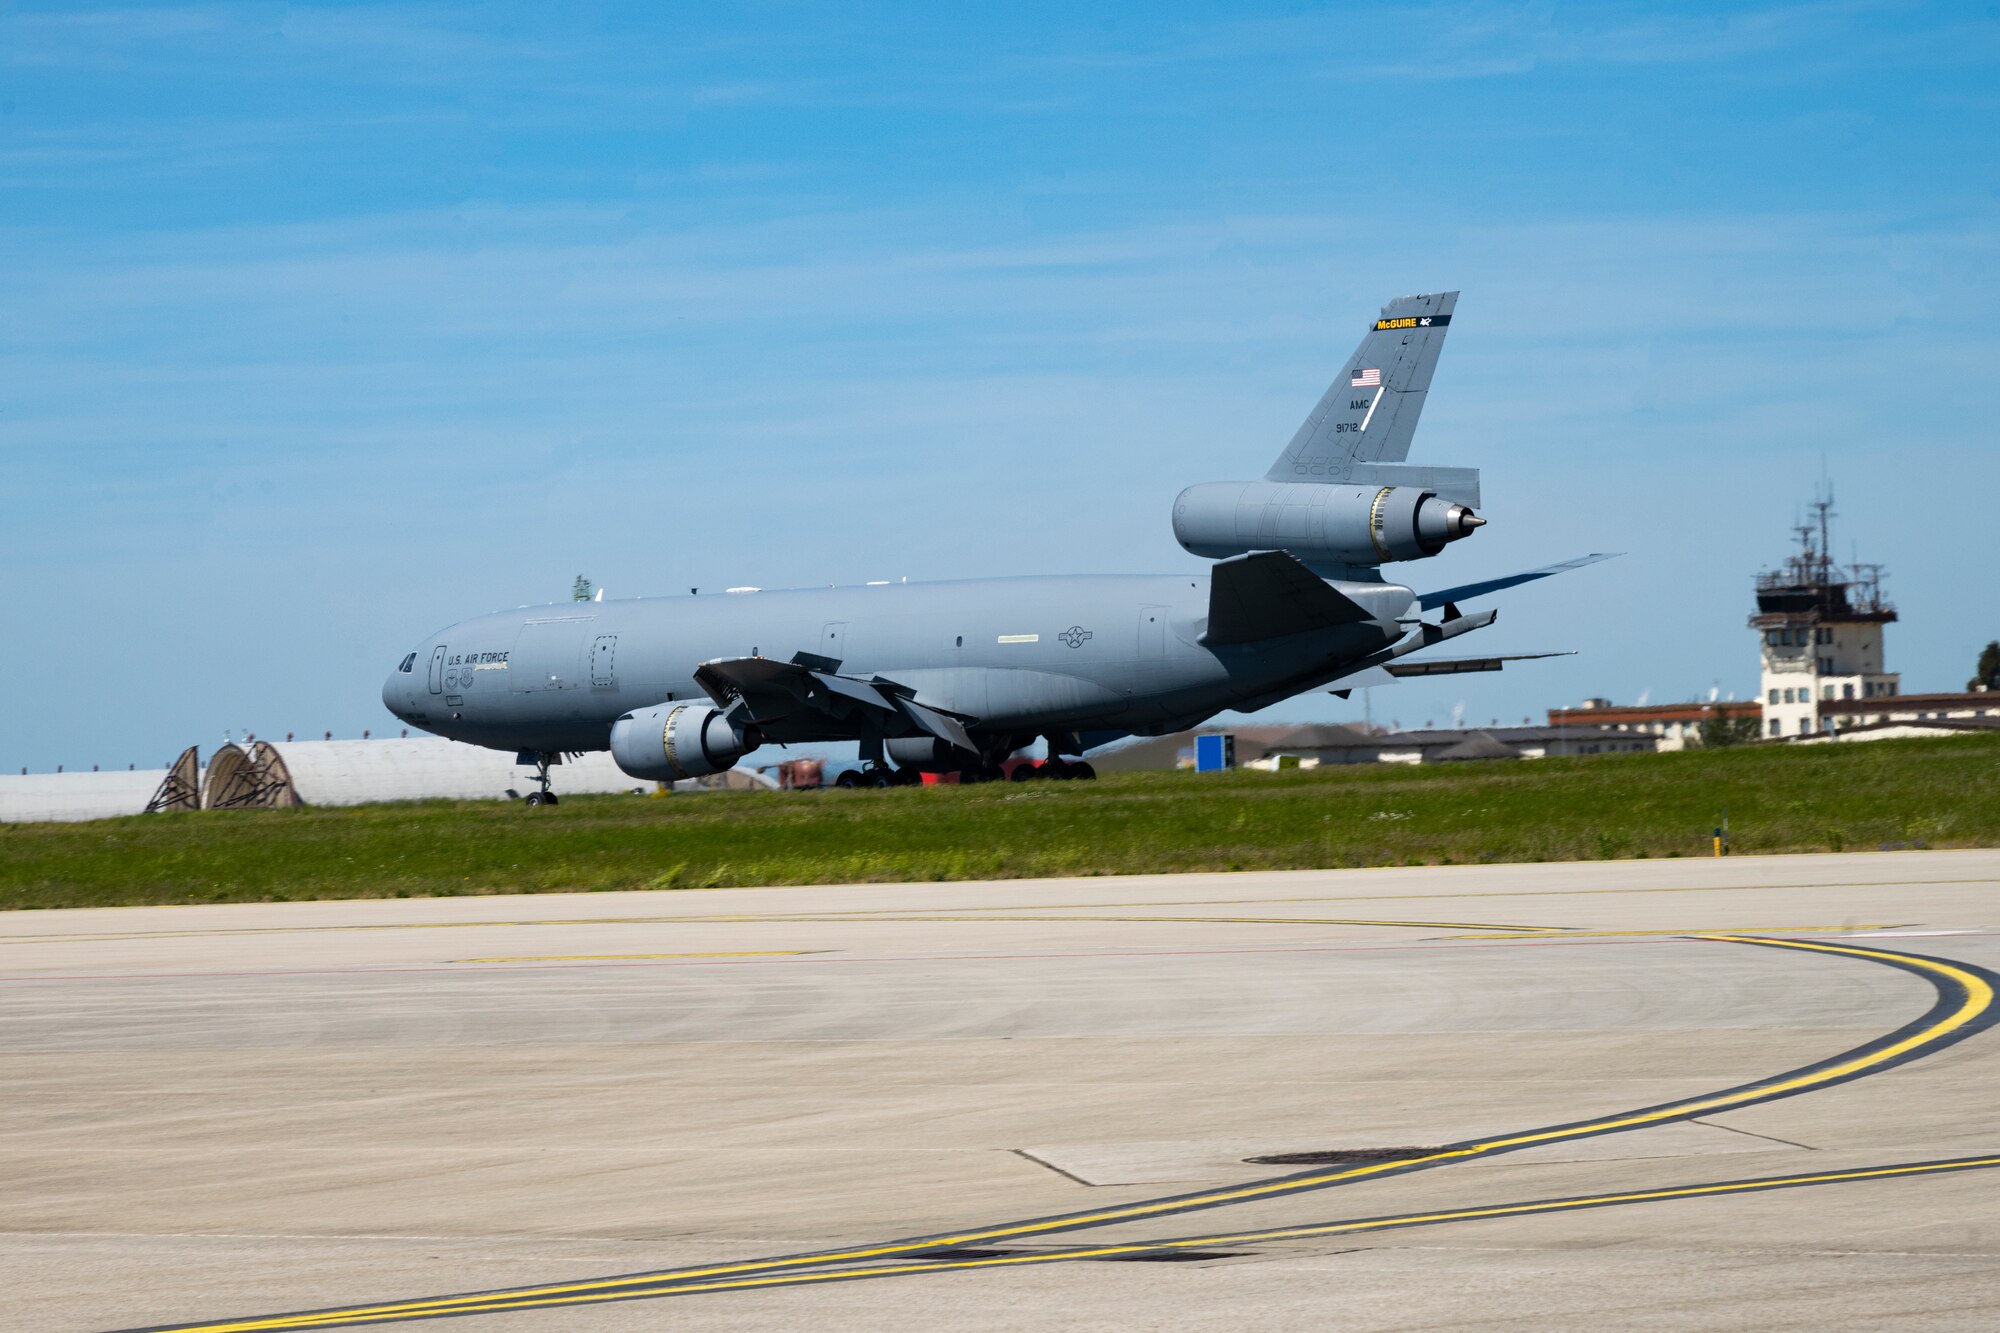 A KC-10 Extender aircraft assigned to the 305th Air Mobility Wing at Joint Base McGuire-Dix-Lakehurst, New Jersey, arrives at Spangdahlem Air Base, Germany, May 14, 2022. U.S. Air Forces in Europe and Air Forces Africa are committed to standing side-by-side with NATO allies and partners to ensure the independence and security of Europe. (U.S. Air Force photo by Senior Airman Ali Stewart)